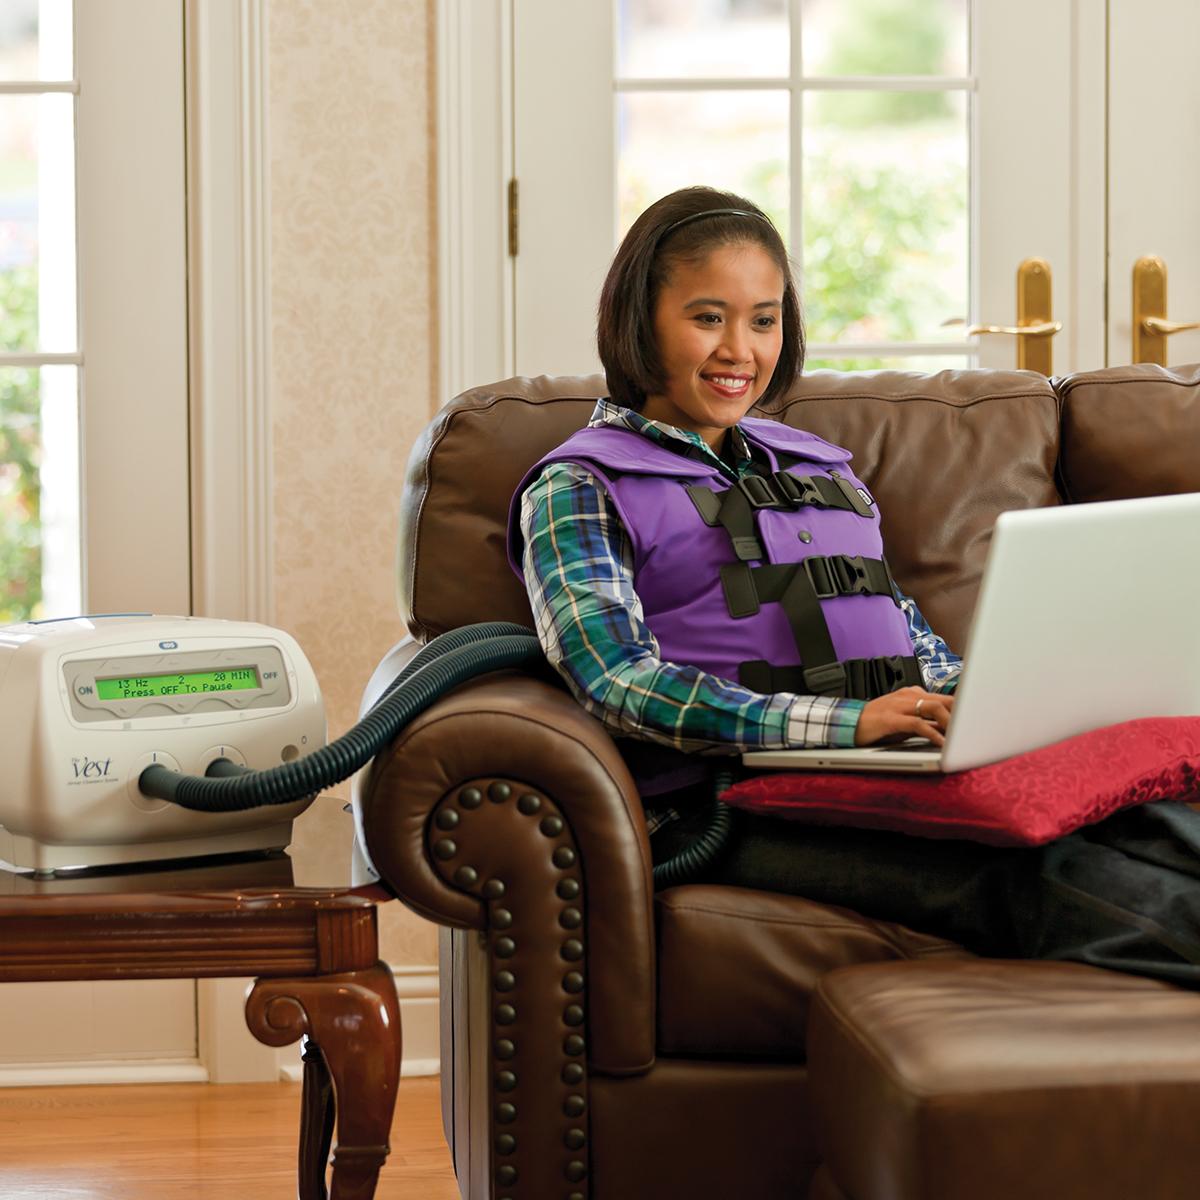 A young woman works on a computer while using The Vest System with a Color Me Purple vest.